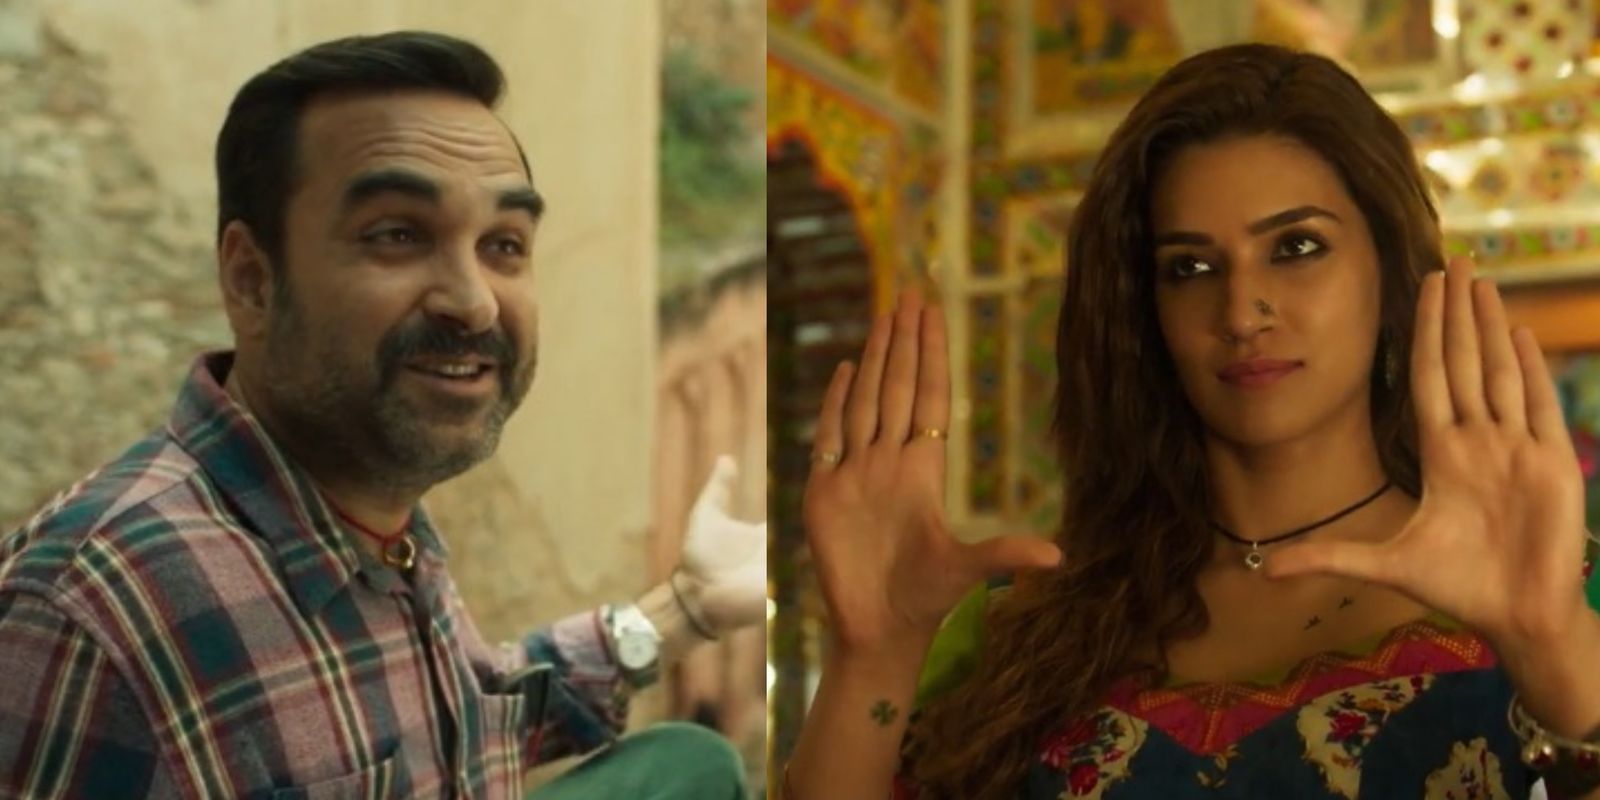 Mimi trailer: Kriti Sanon and Pankaj Tripathi prove that they are an incredible package in this mind-blowing story